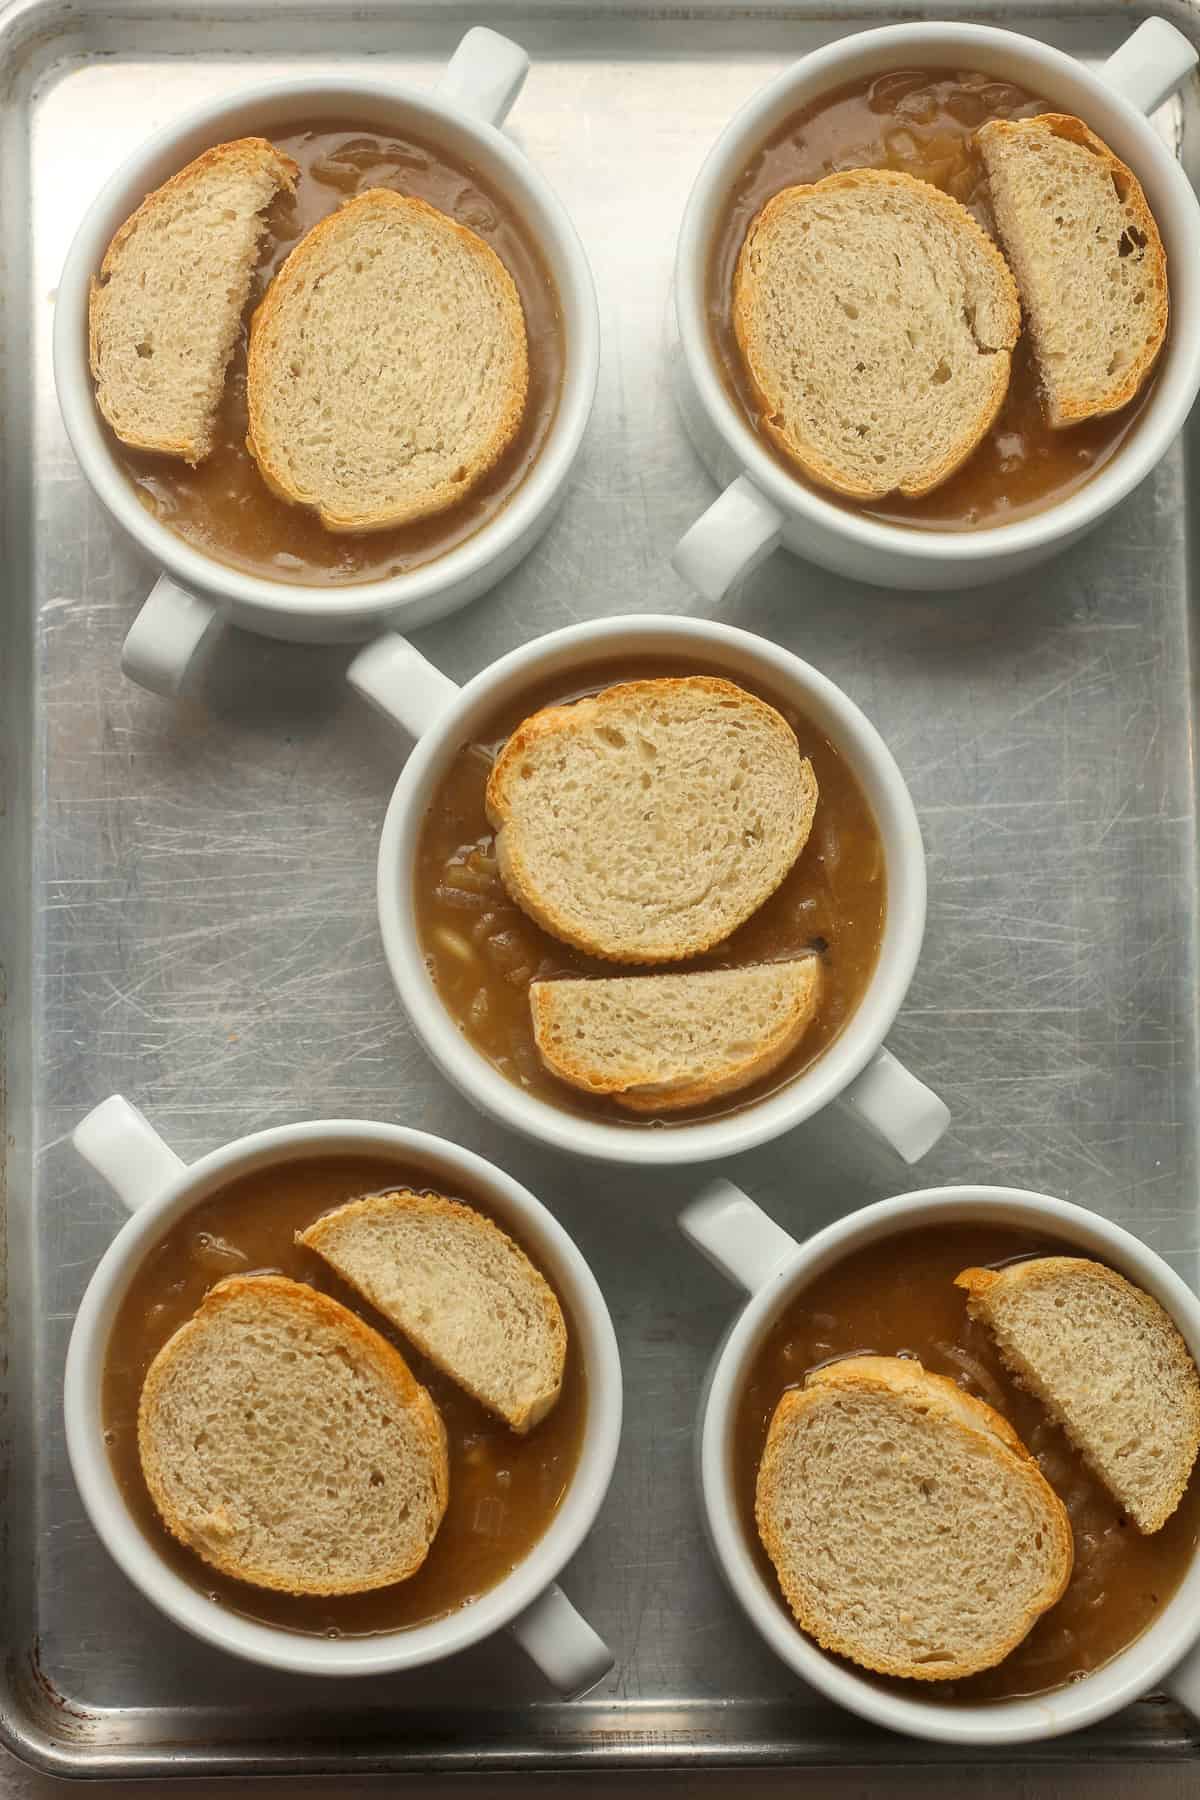 The bowls of soup with the toasted bread on top.